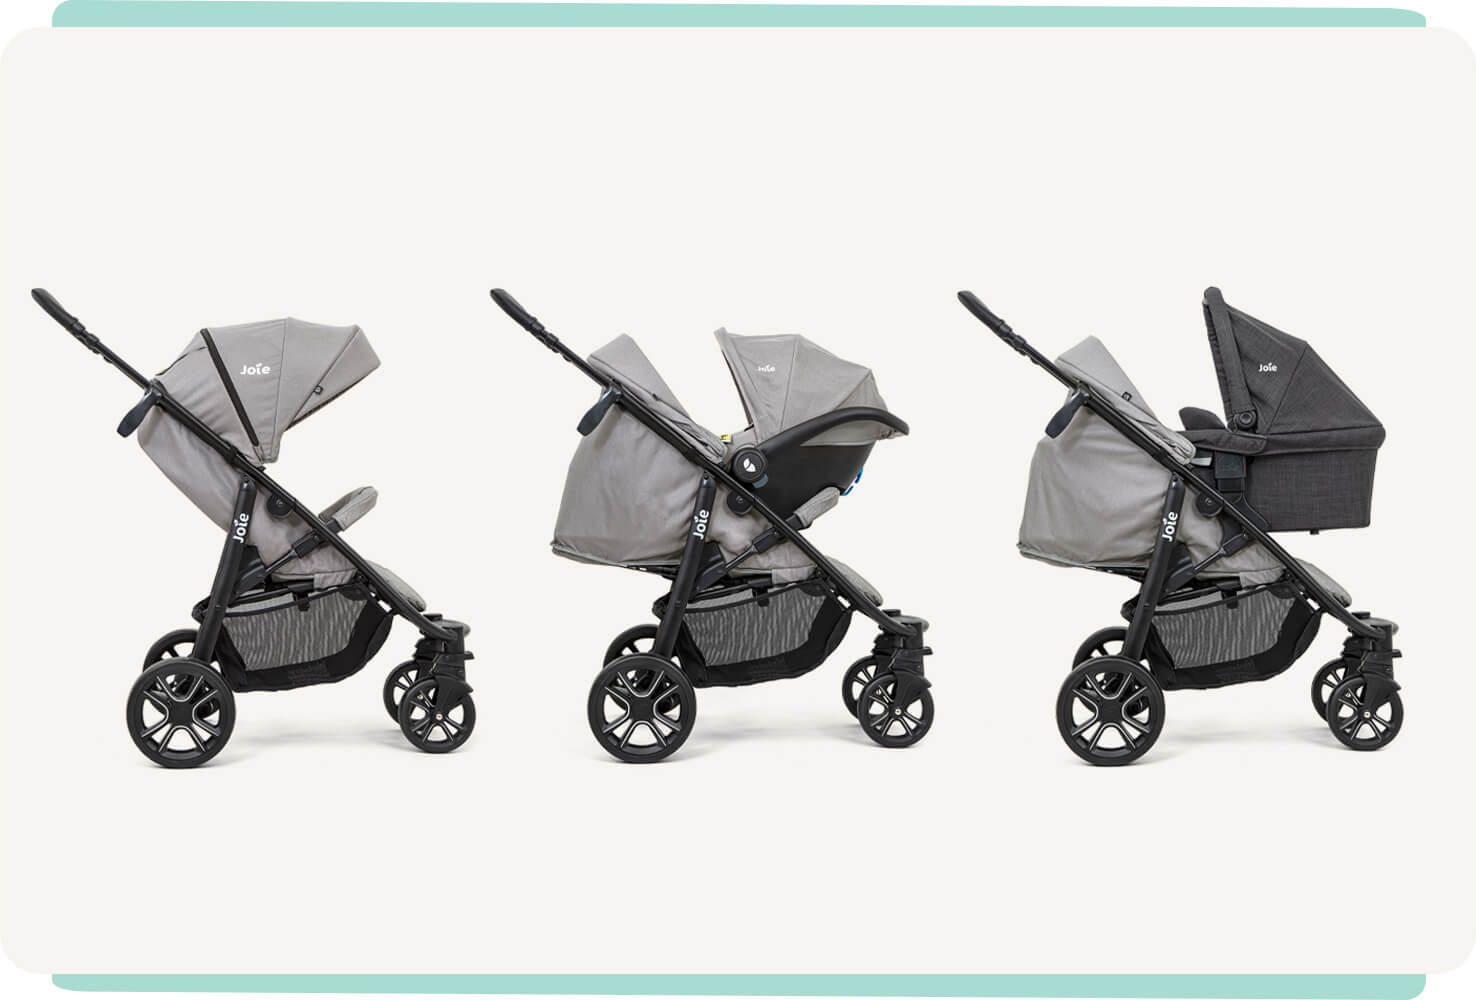  3 gray litetrax 4 dlx strollers in profile showing the 3 modes of use: pushchair, infant car seat travel system, and carry cot travel system.